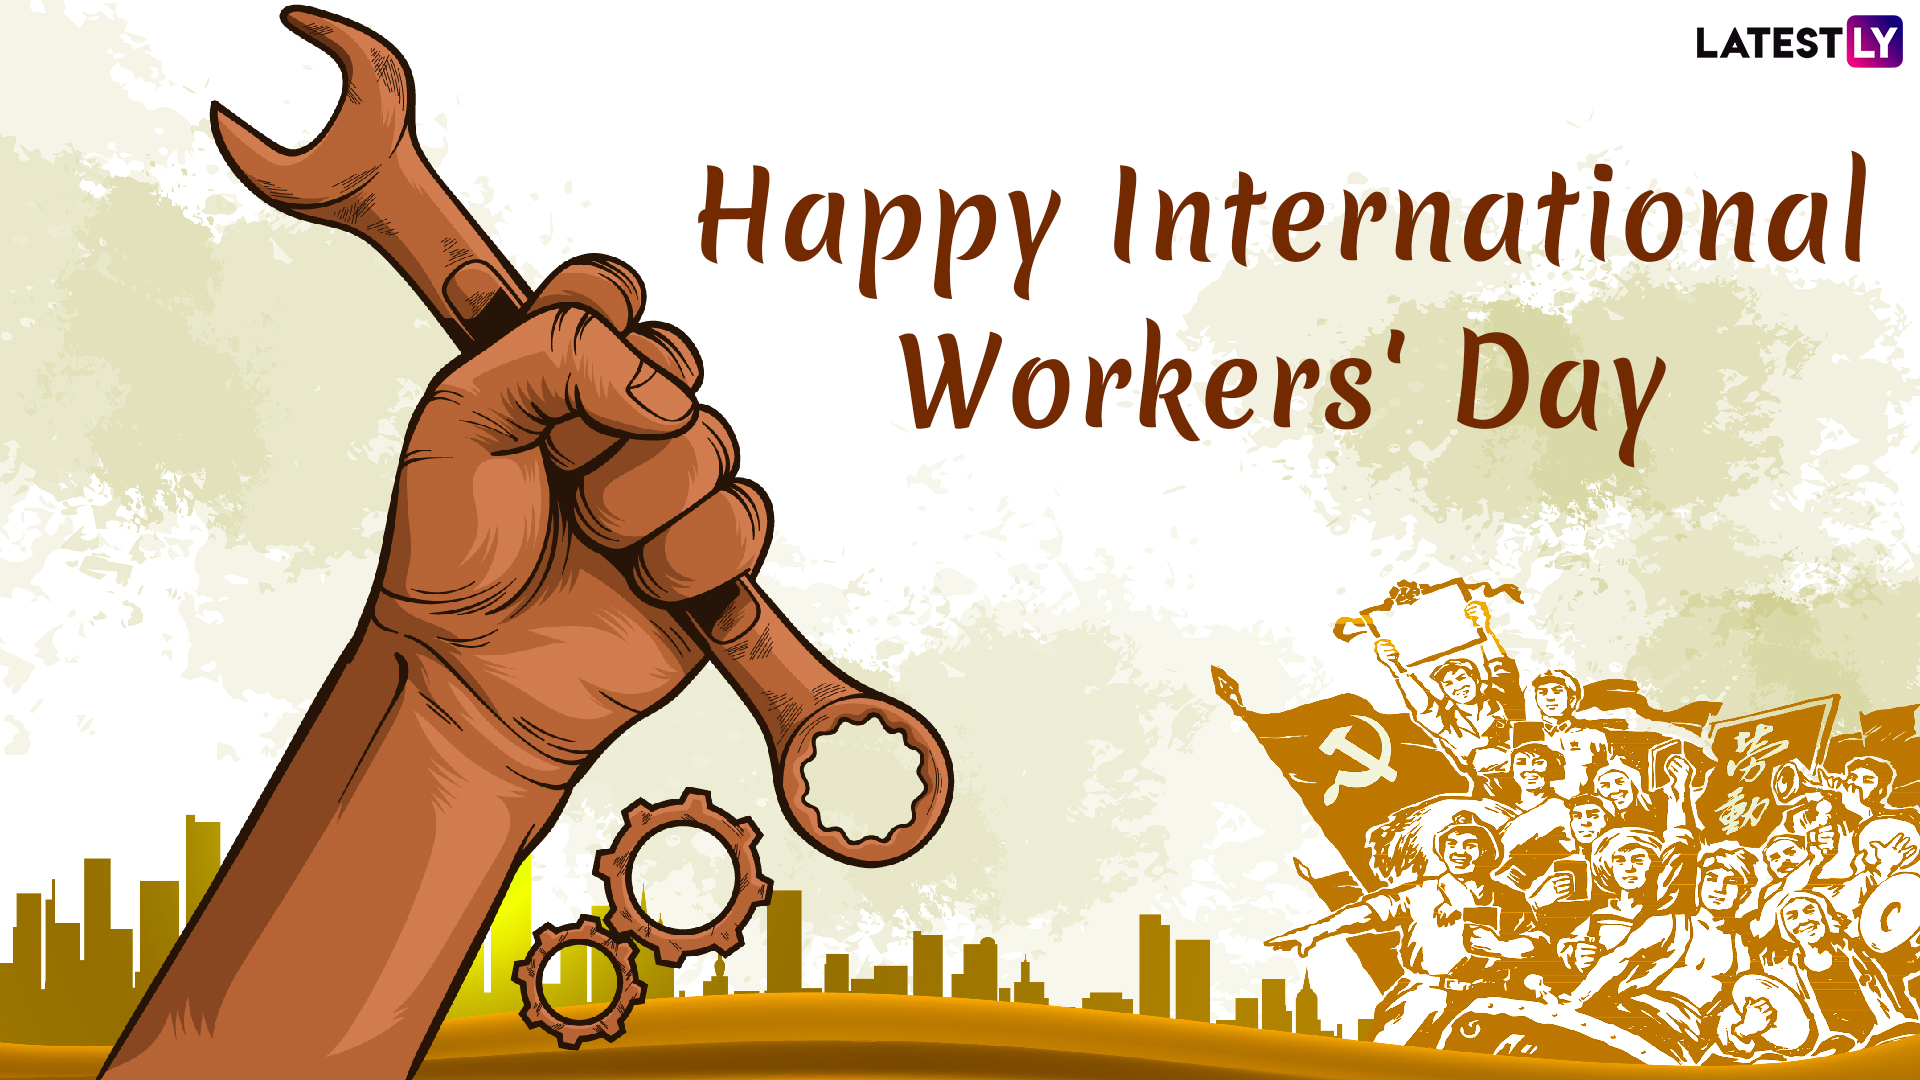 May working days. International workers' Day. International Labor Day. 1 May International workers' Day. 1 May Labor Day.